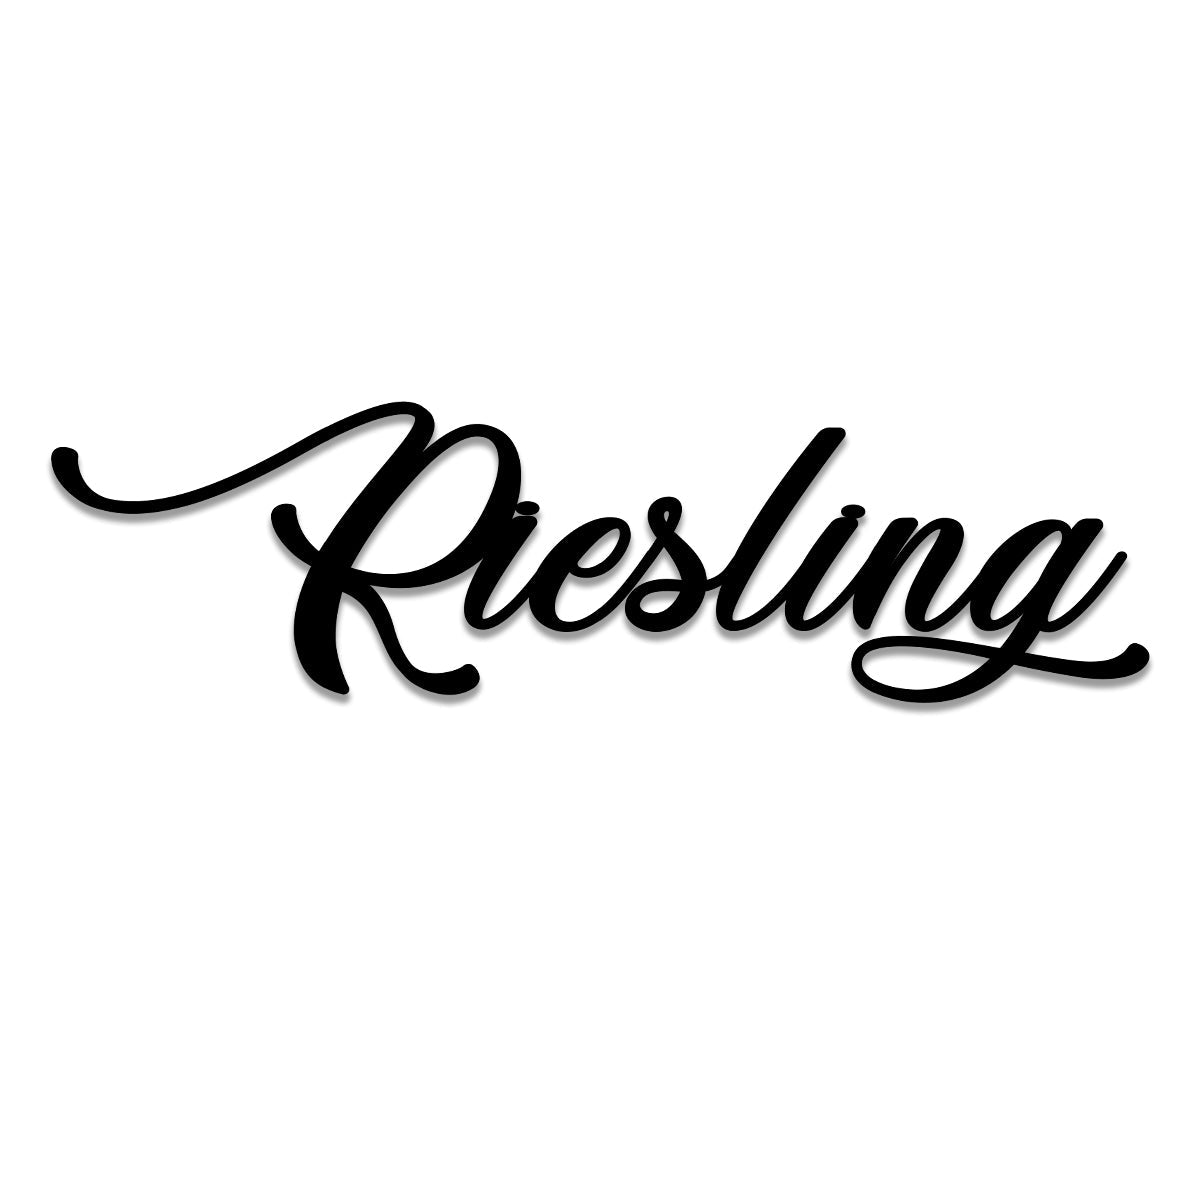 Riesling Wine Metal Bar Sign, Pub, Tap, Wall Decor, Wedding Art Gift For Him/her